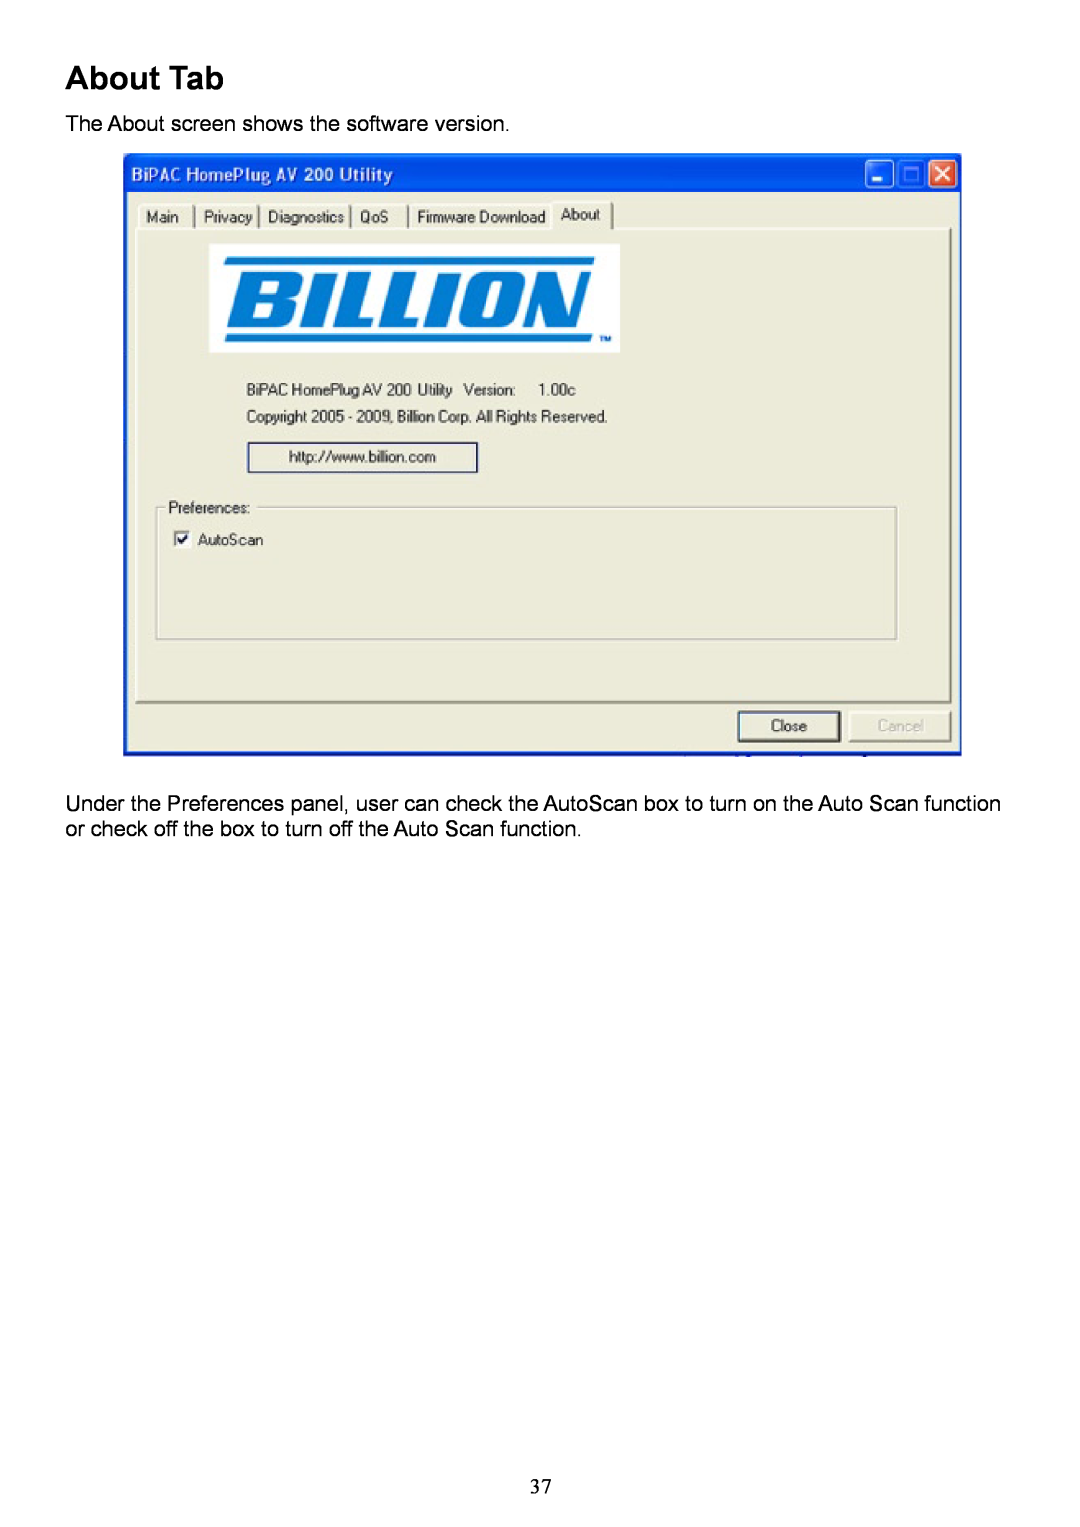 Billion Electric Company 2073 user manual About Tab, The About screen shows the software version 